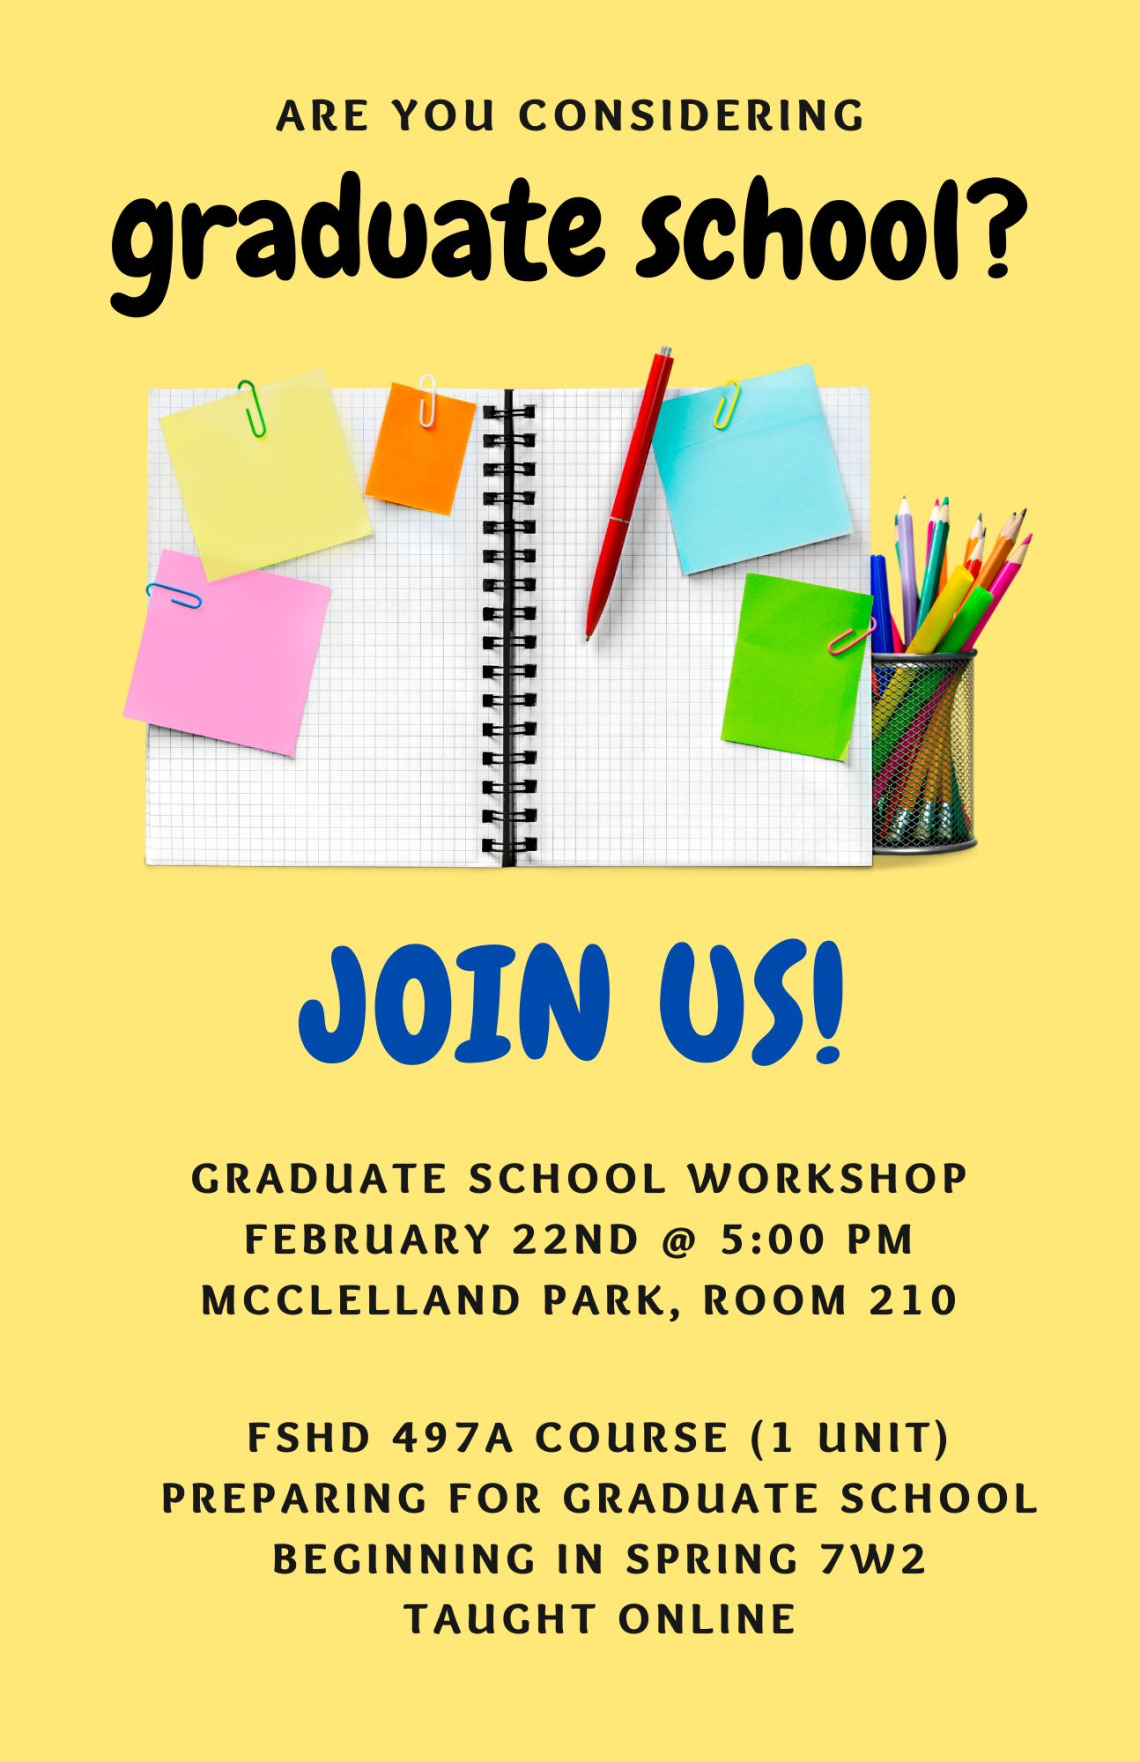 Text reads "are you considering graduate school?" with notebook + pens. Information about workshop and class below.